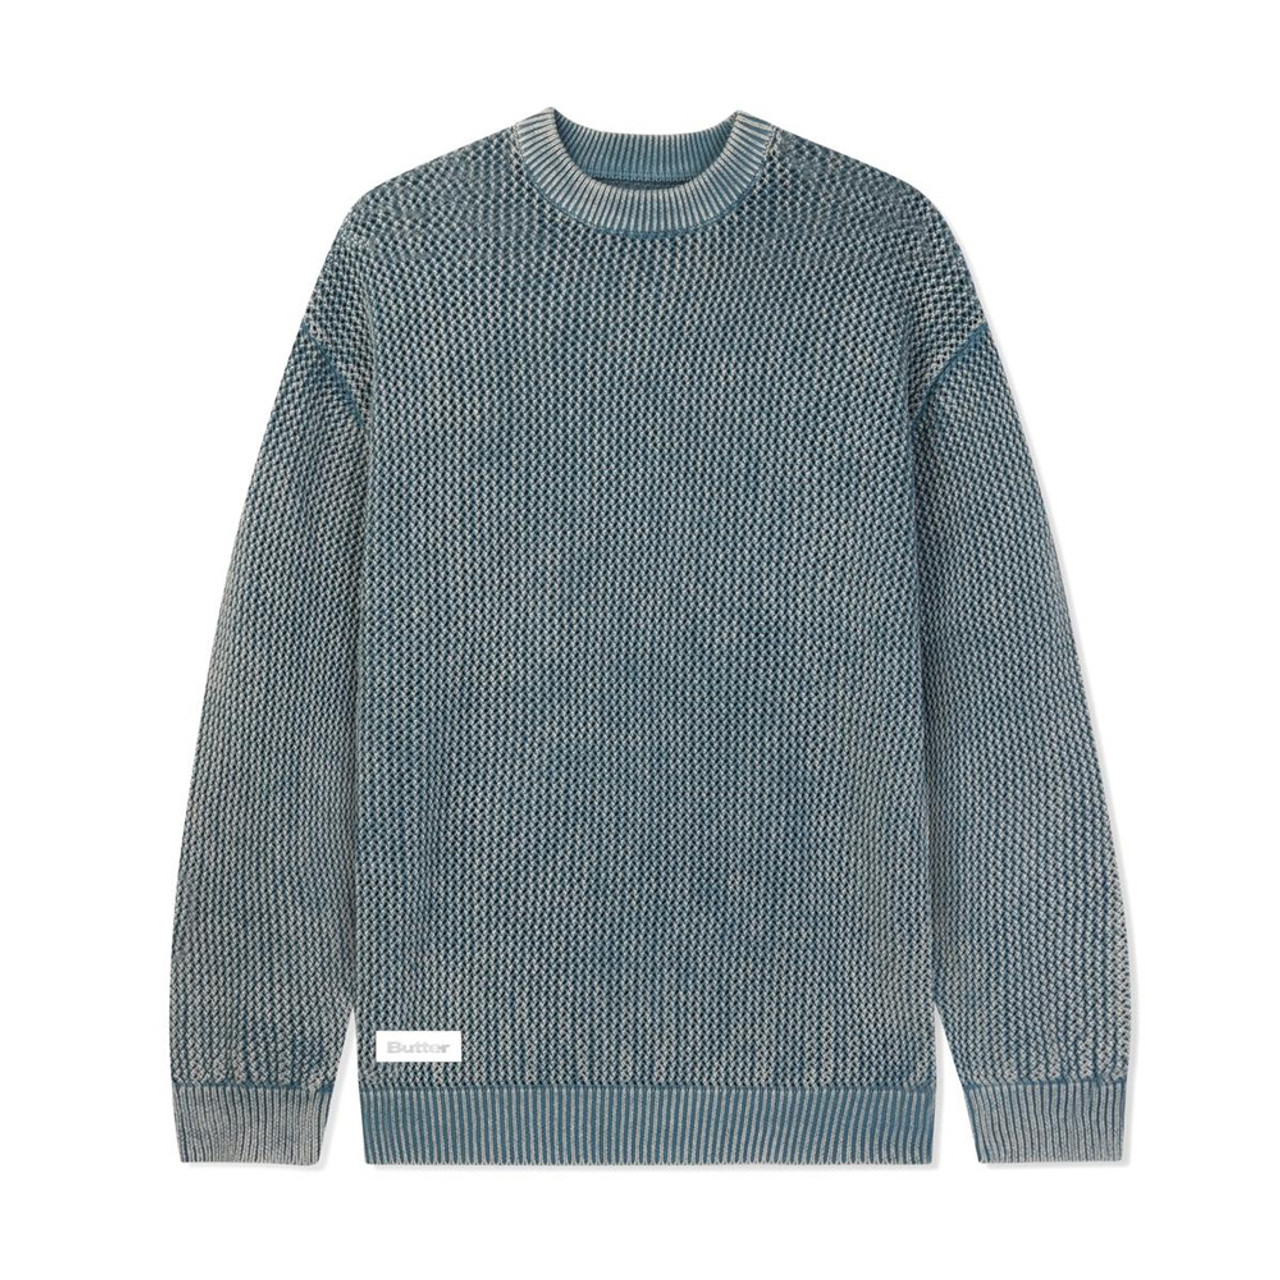 BUTTER GOODS Washed Knitted Sweater Navy